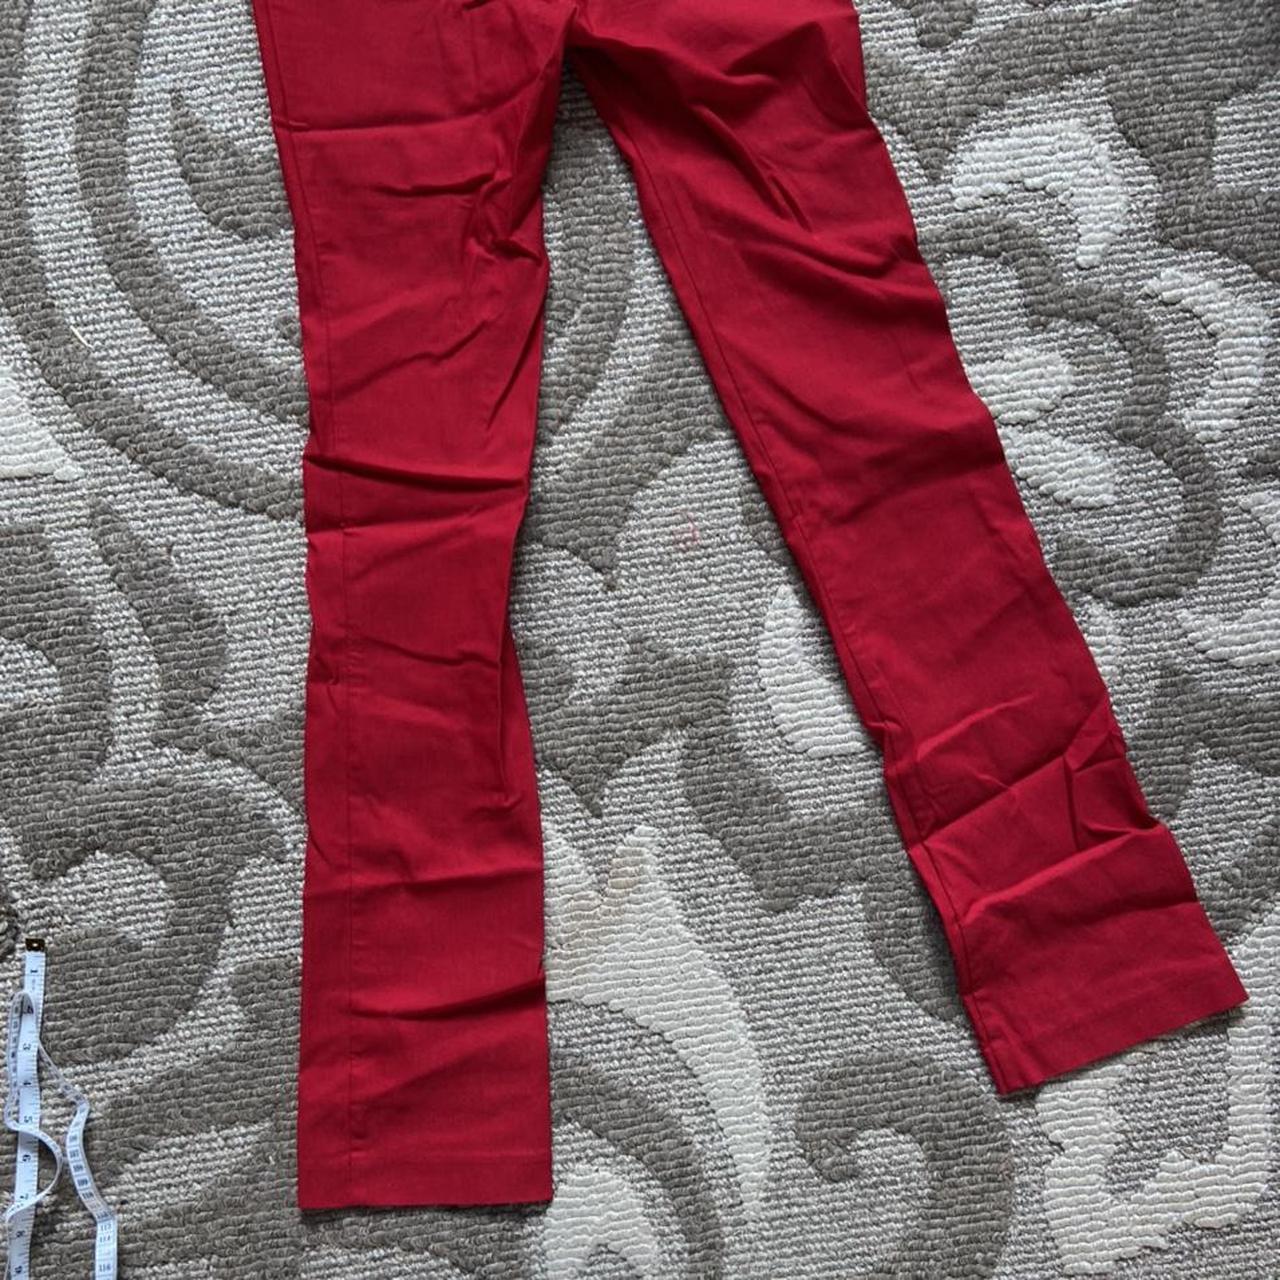 Stretchy red pants! Early 2000s look with a super... - Depop